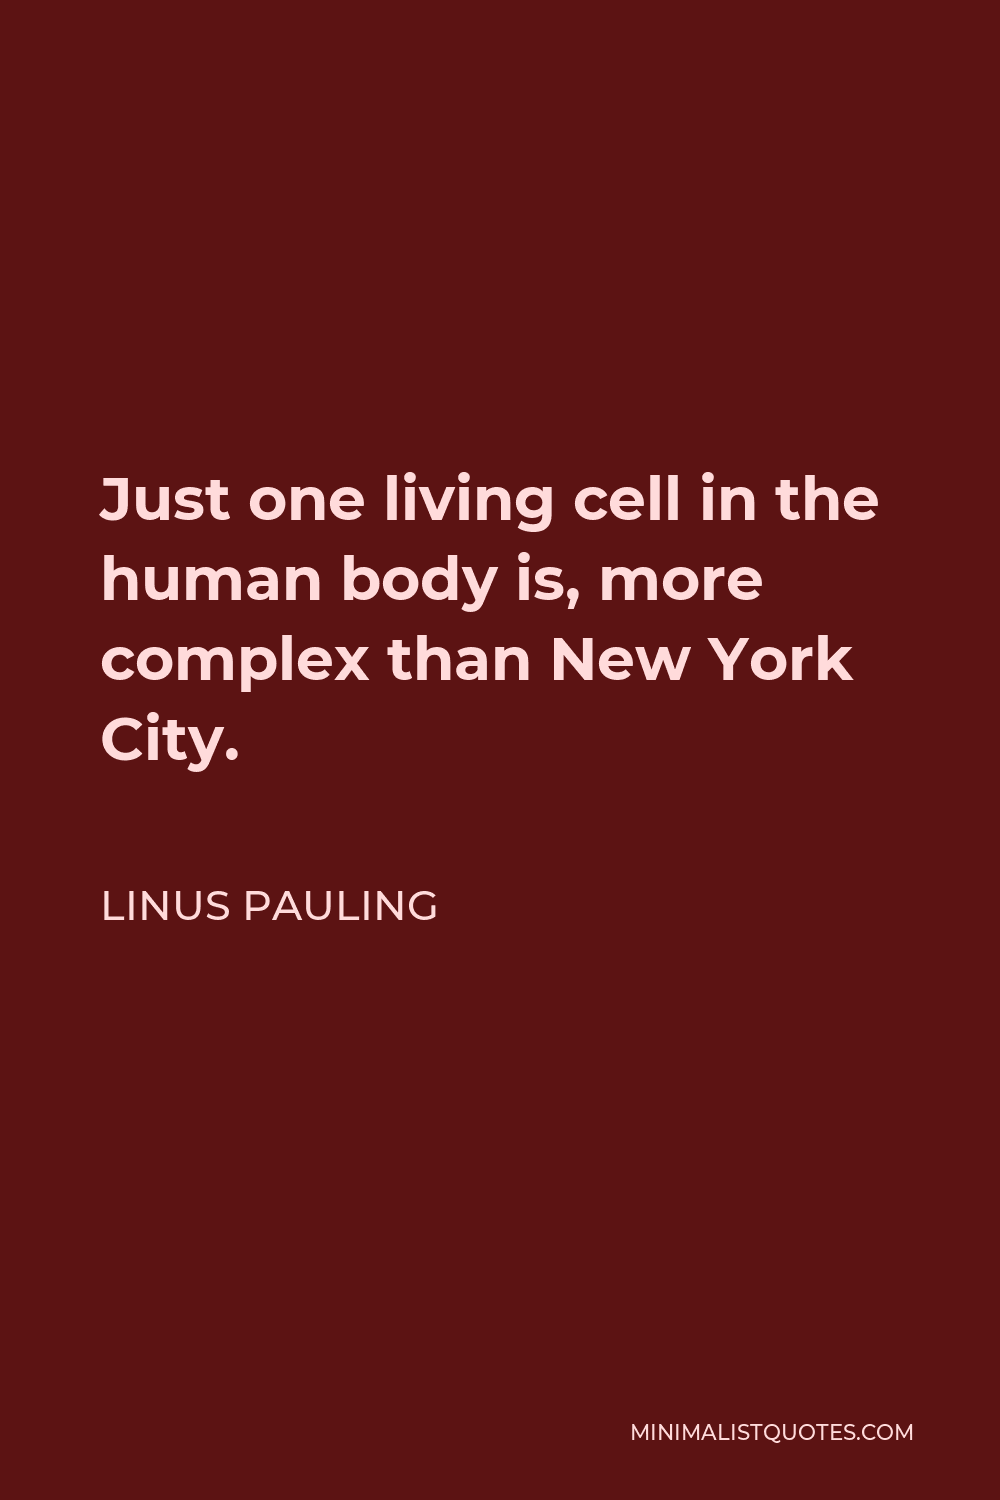 Linus Pauling Quote - Just one living cell in the human body is, more complex than New York City.